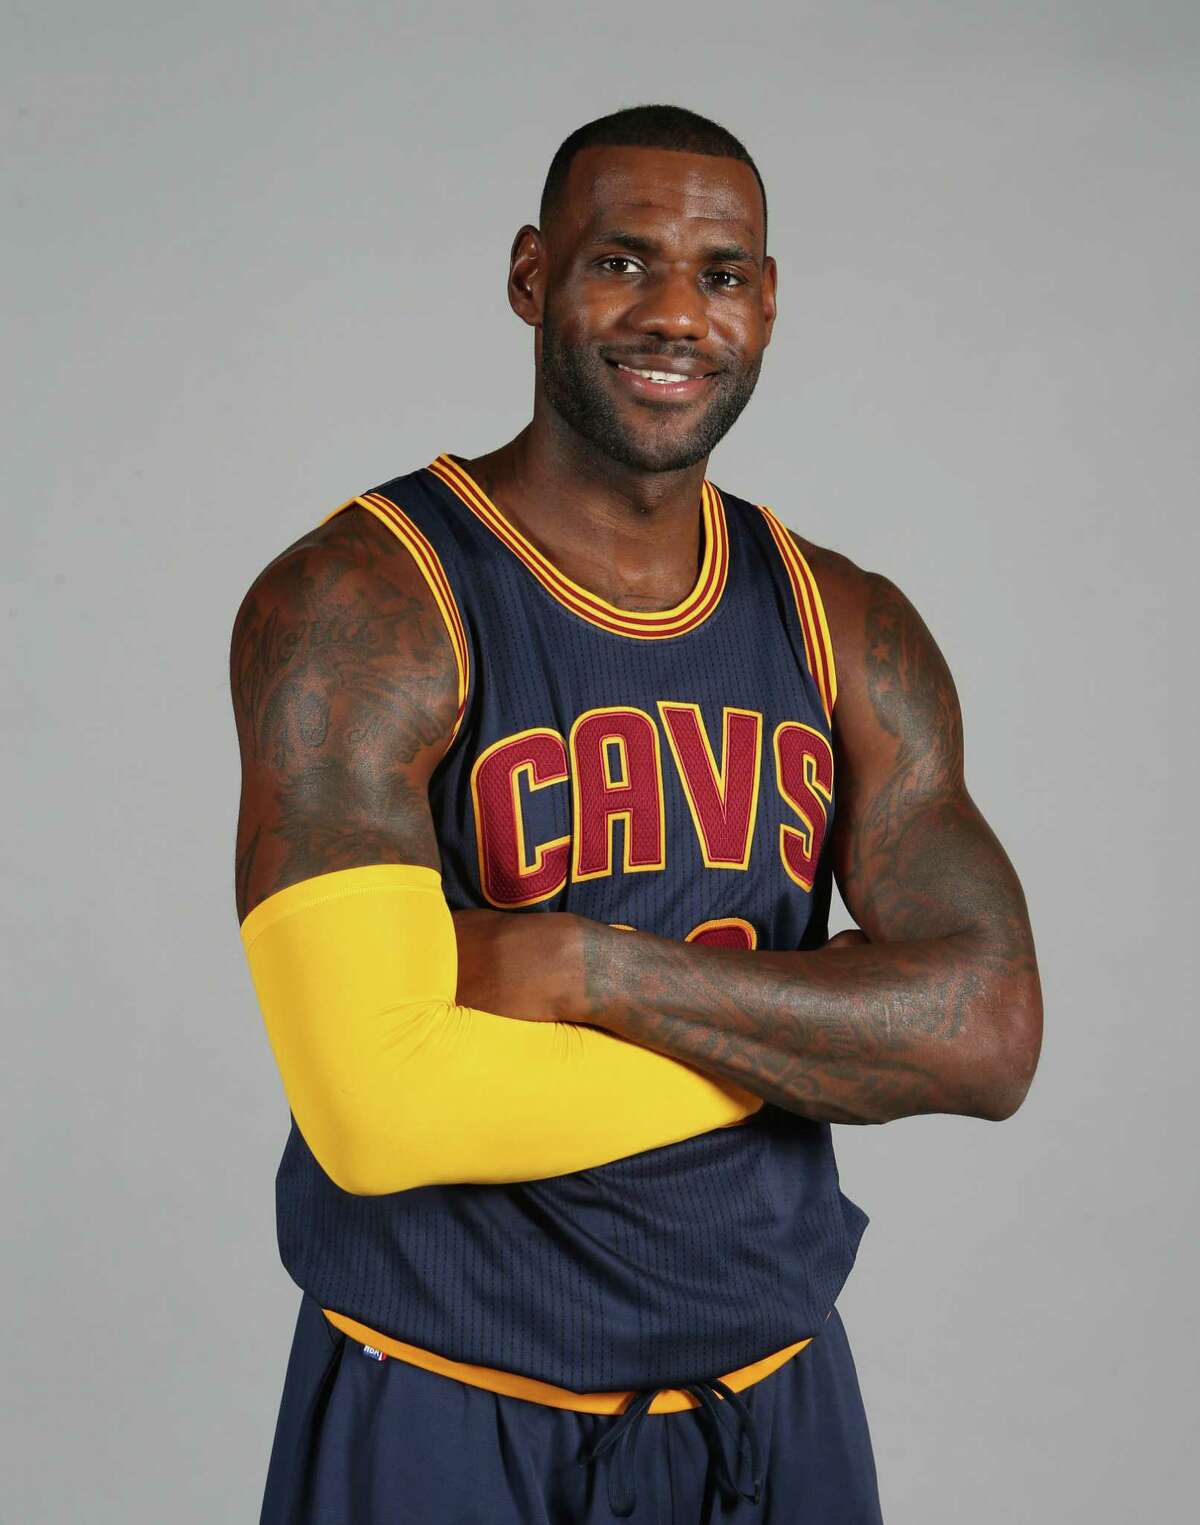 This is Sept. 28, 2015 photo shows Cleveland Cavaliers’ LeBron James posed during the NBA team’s media day Independence, Ohio.